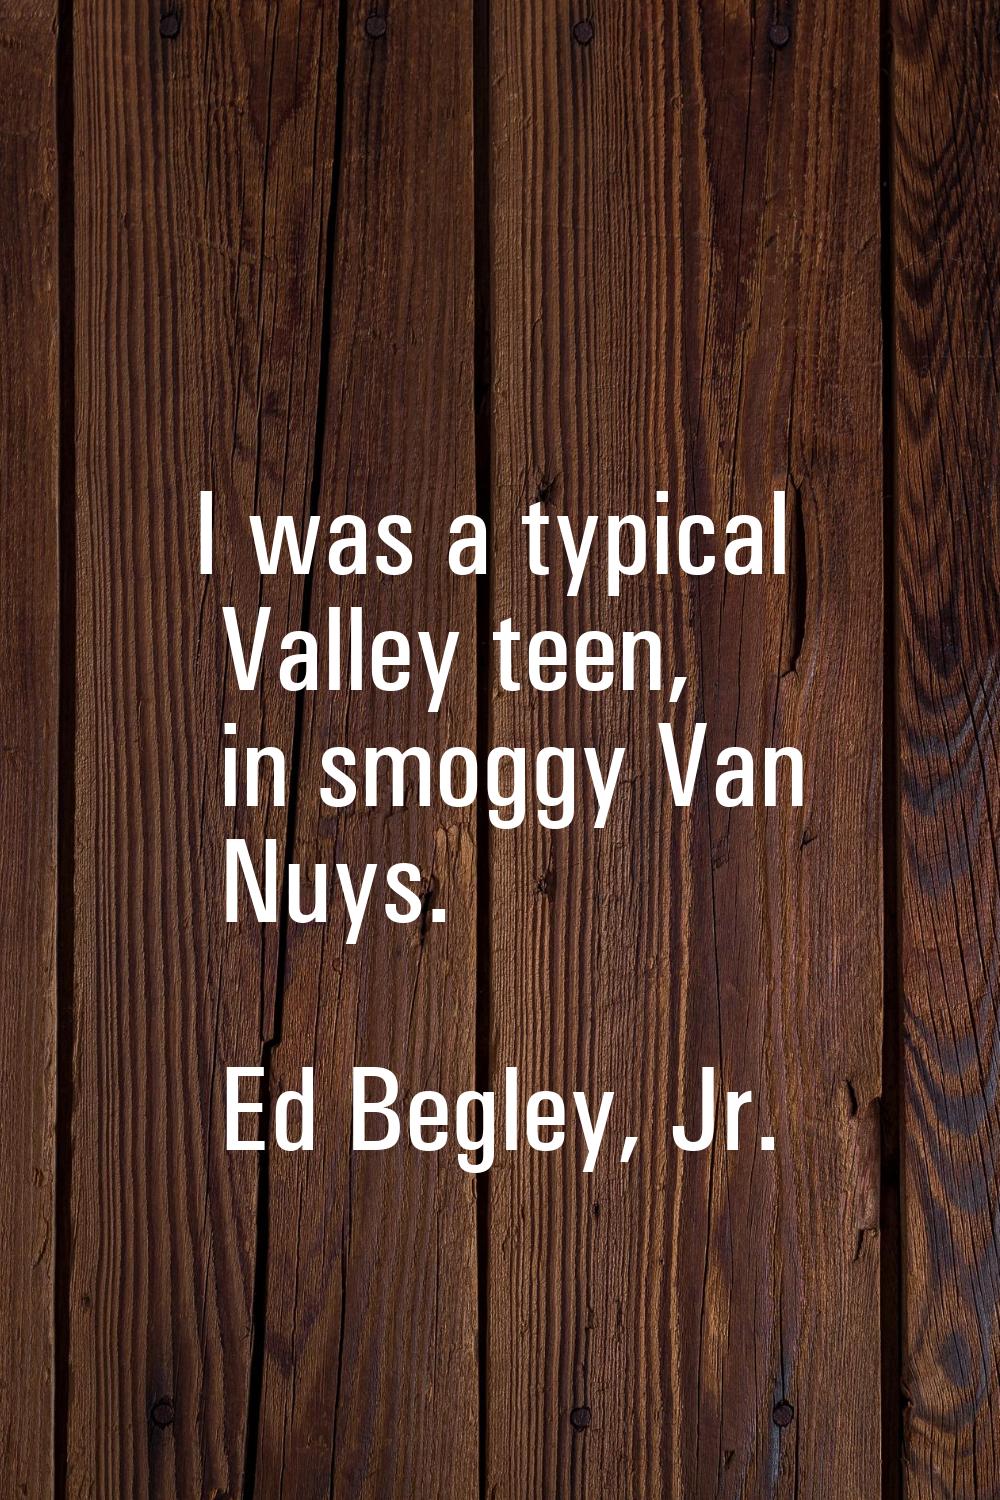 I was a typical Valley teen, in smoggy Van Nuys.